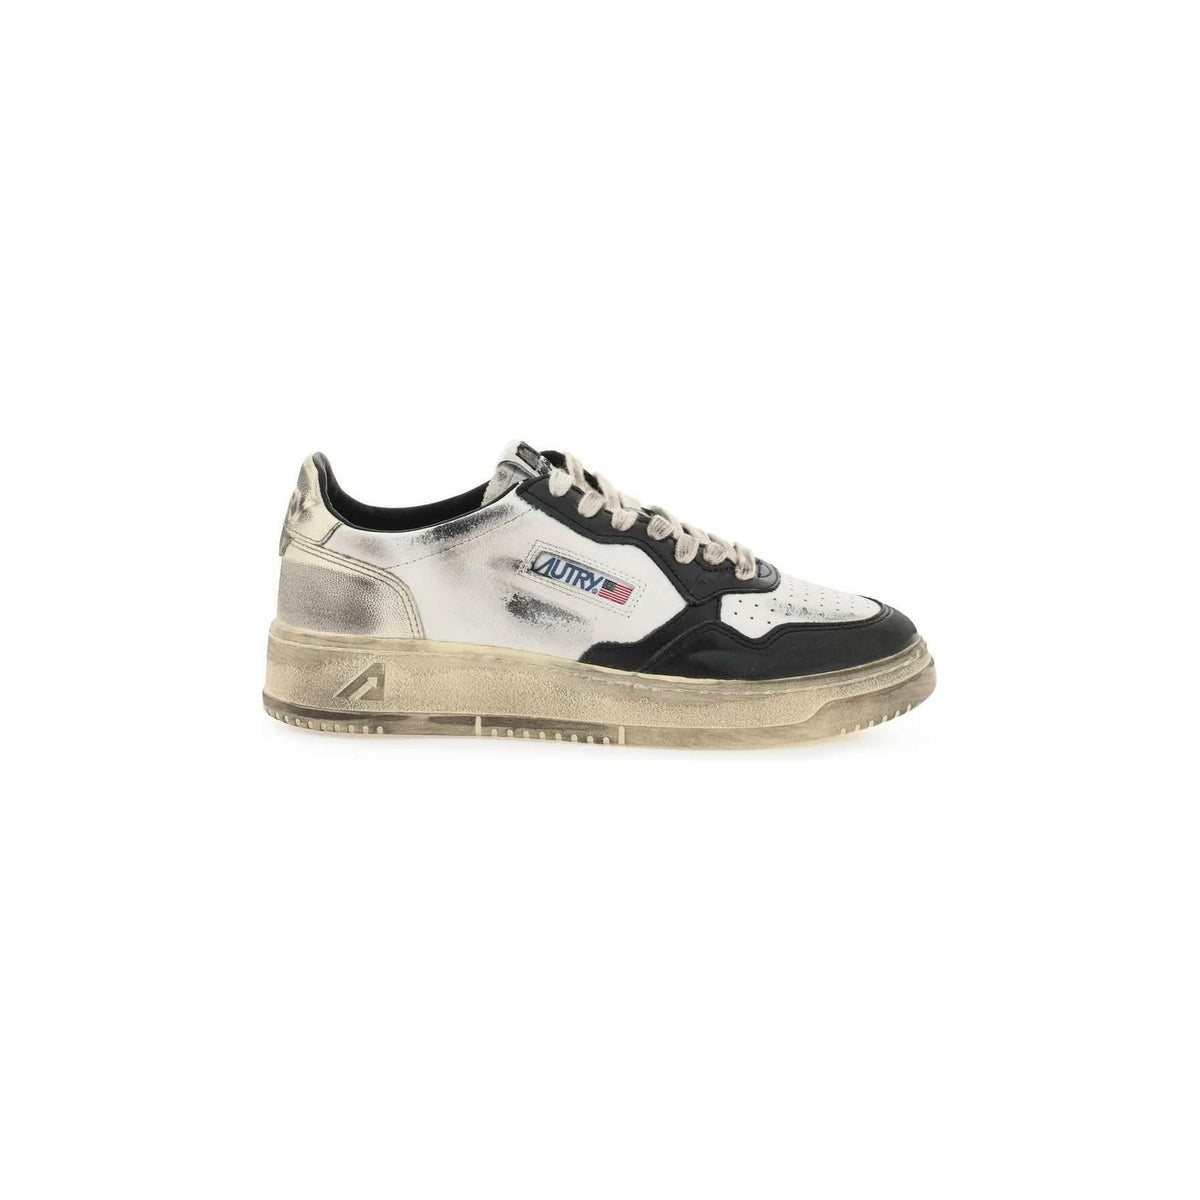 White and Black Medalist Low Super Vintage Sneakers AUTRY JOHN JULIA.